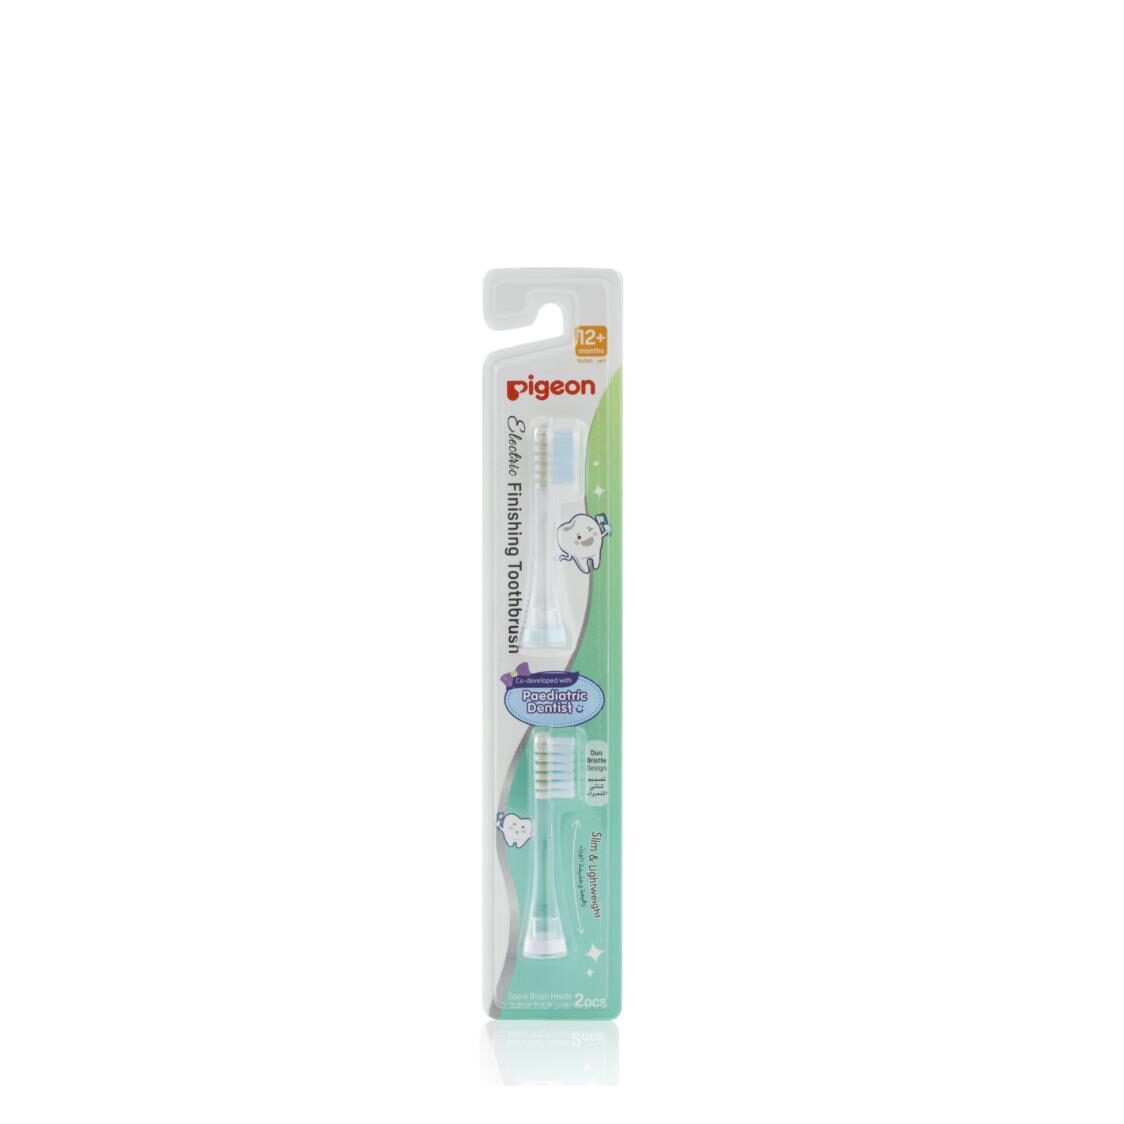 Pigeon Electric Finish Toothbrush Spare Brush